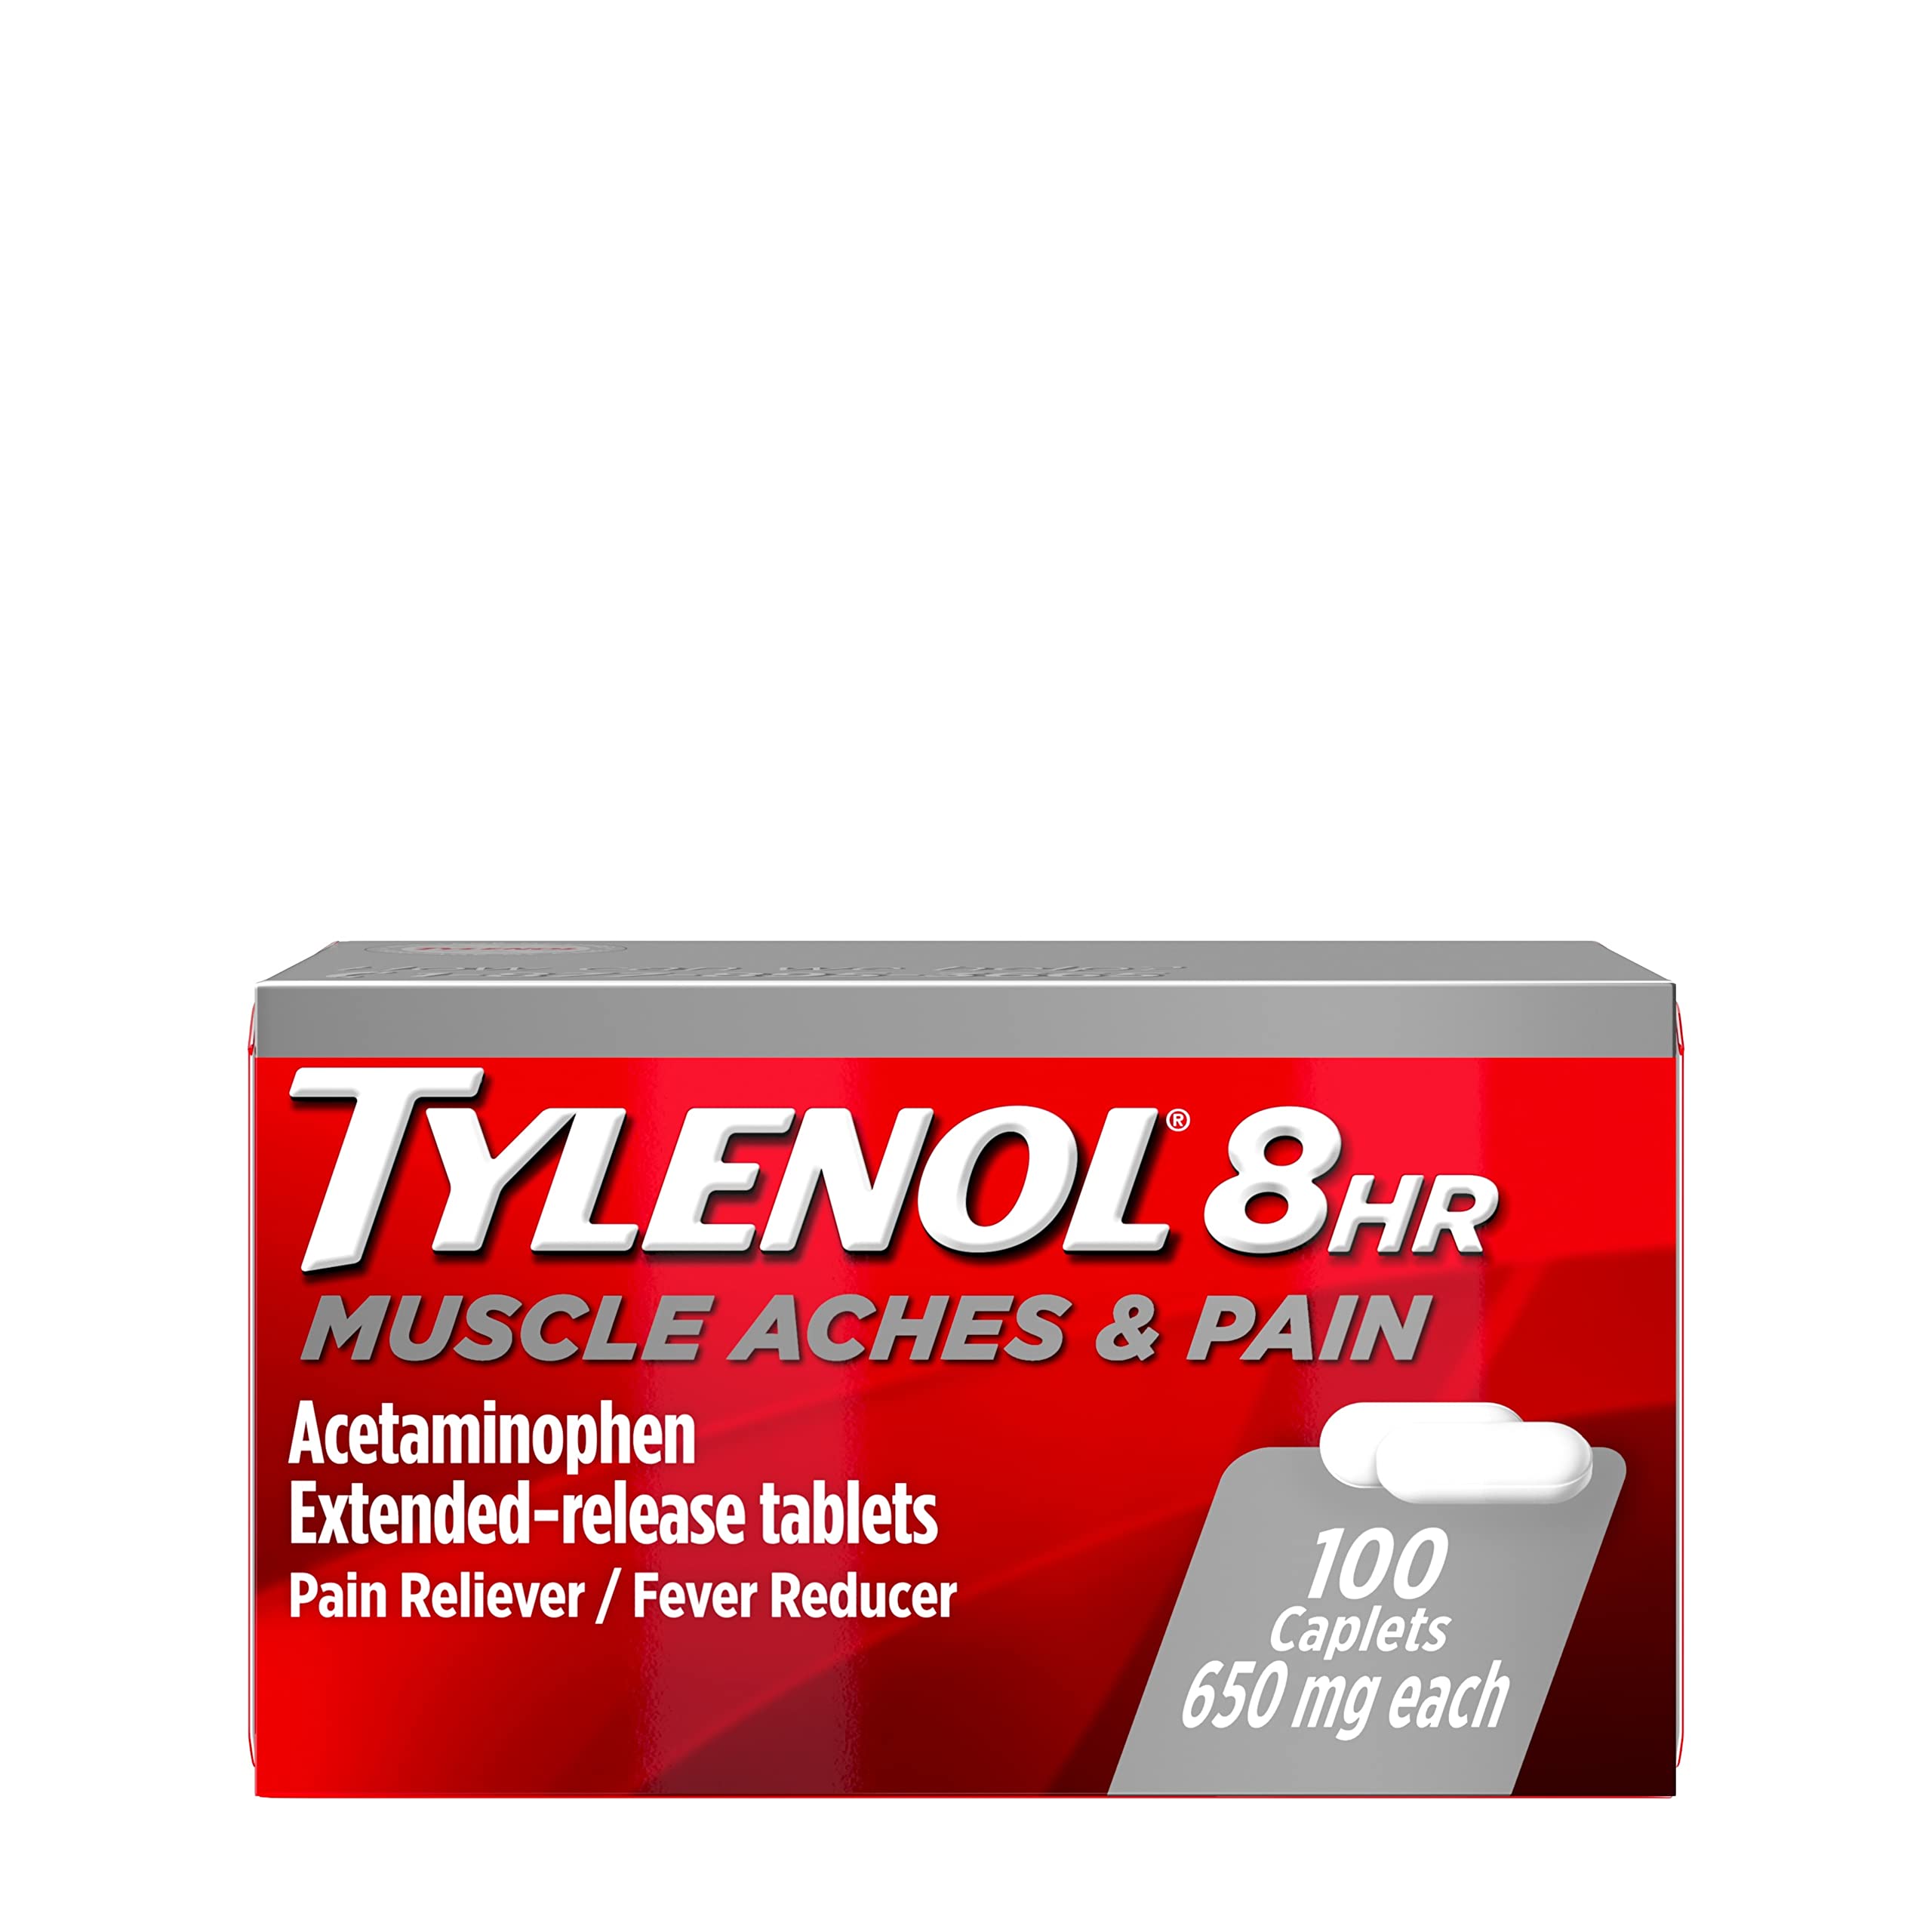 Tylenol 8 Hour Muscle Aches & Pain Acetaminophen Tablets for Muscle & Back Pain, 100 Count